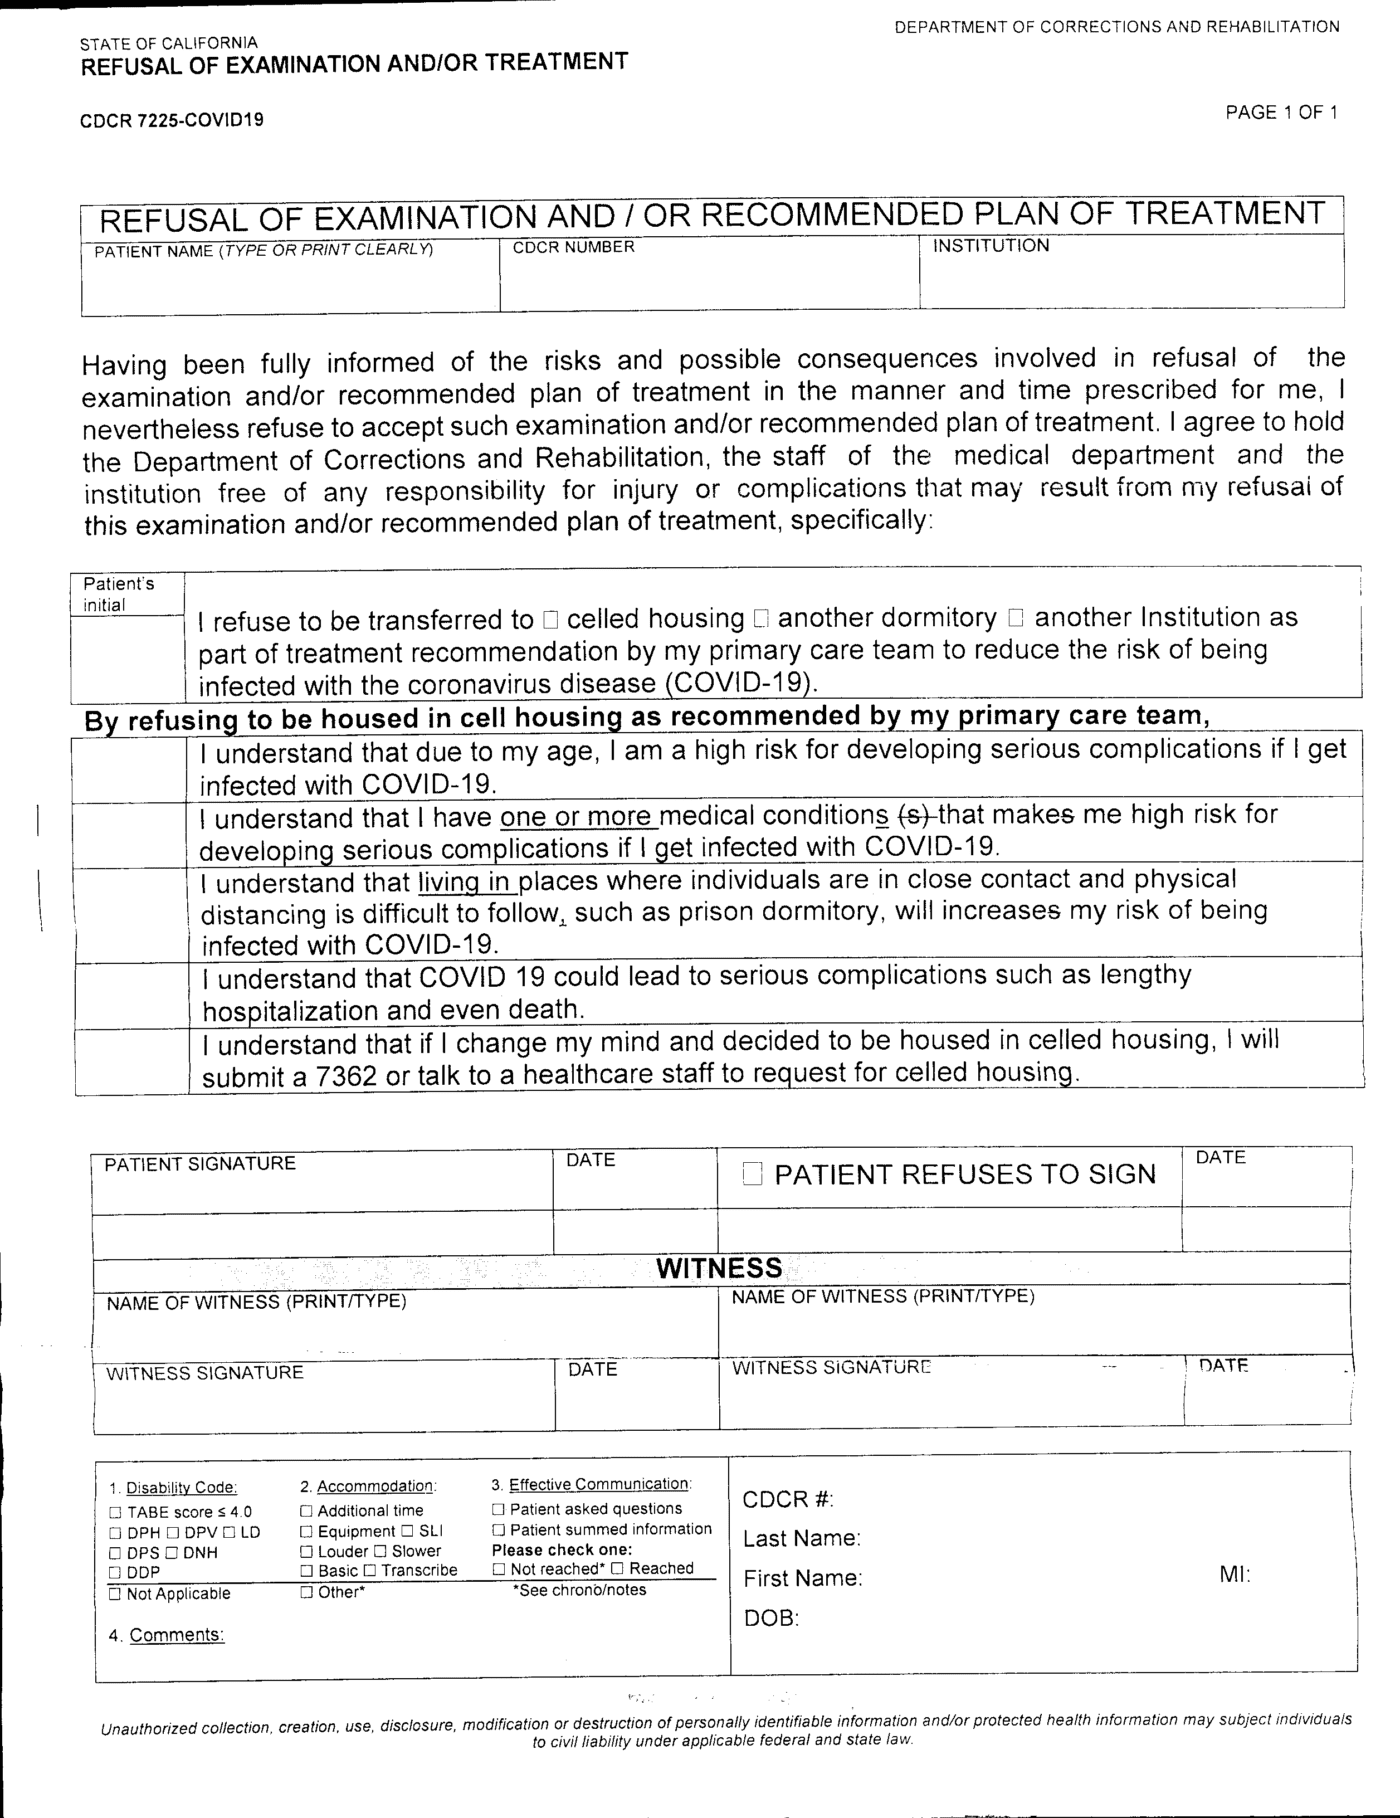 CDCR-7226-COVID19-waiver-requiring-prisoners-to-accept-liability-for-their-own-deaths-1220-1400x1818, San Quentin prison staff forcing prisoners to accept liability for their own deaths from COVID-19, Behind Enemy Lines 